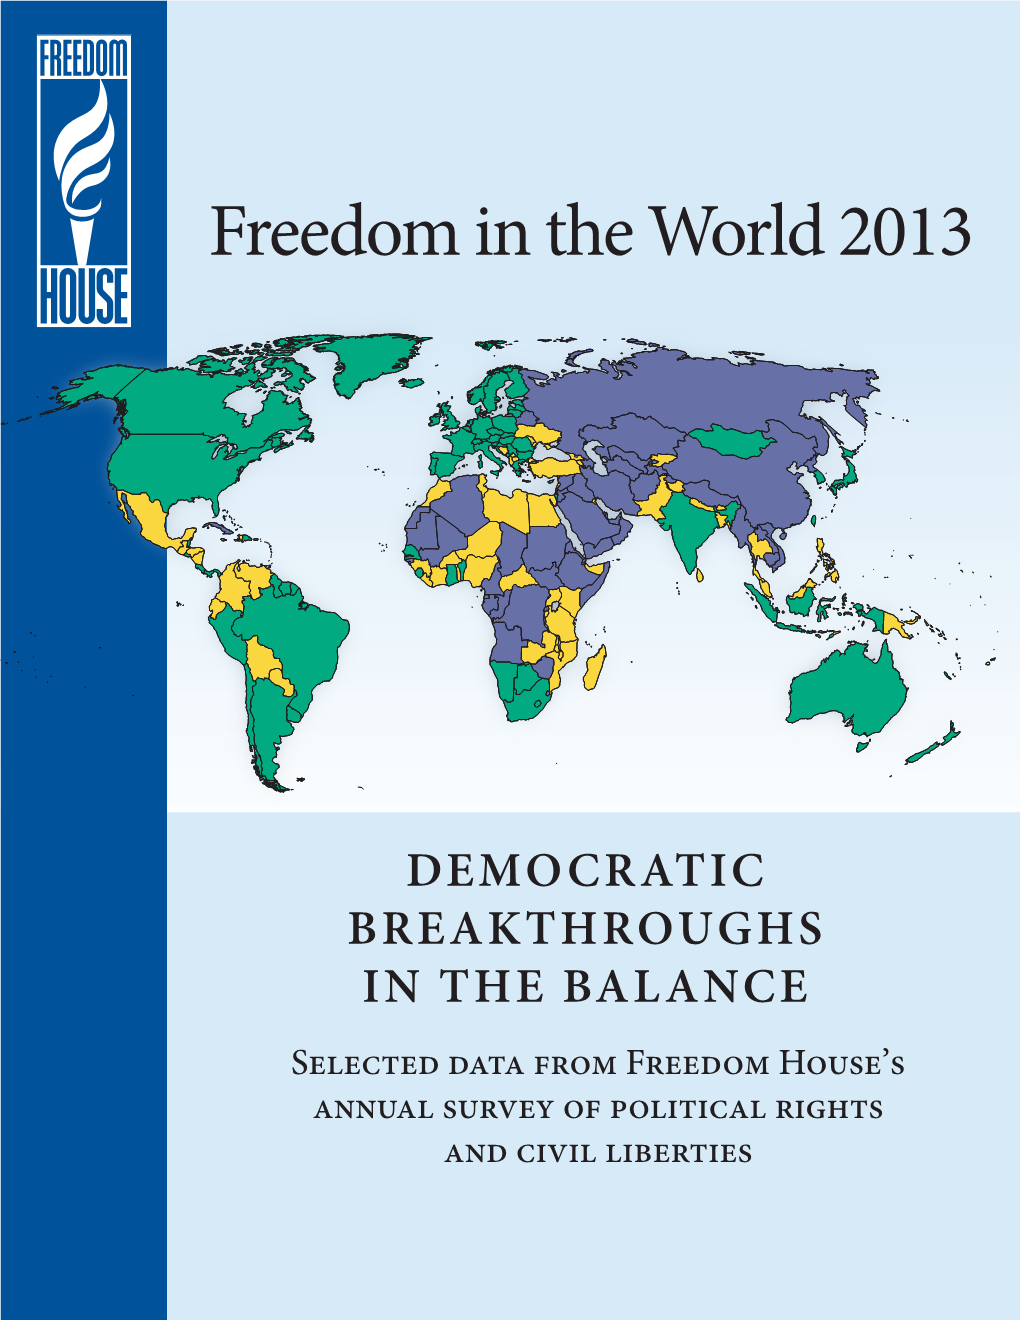 Freedom in the World 2013: Democratic Breakthroughs in the Balance